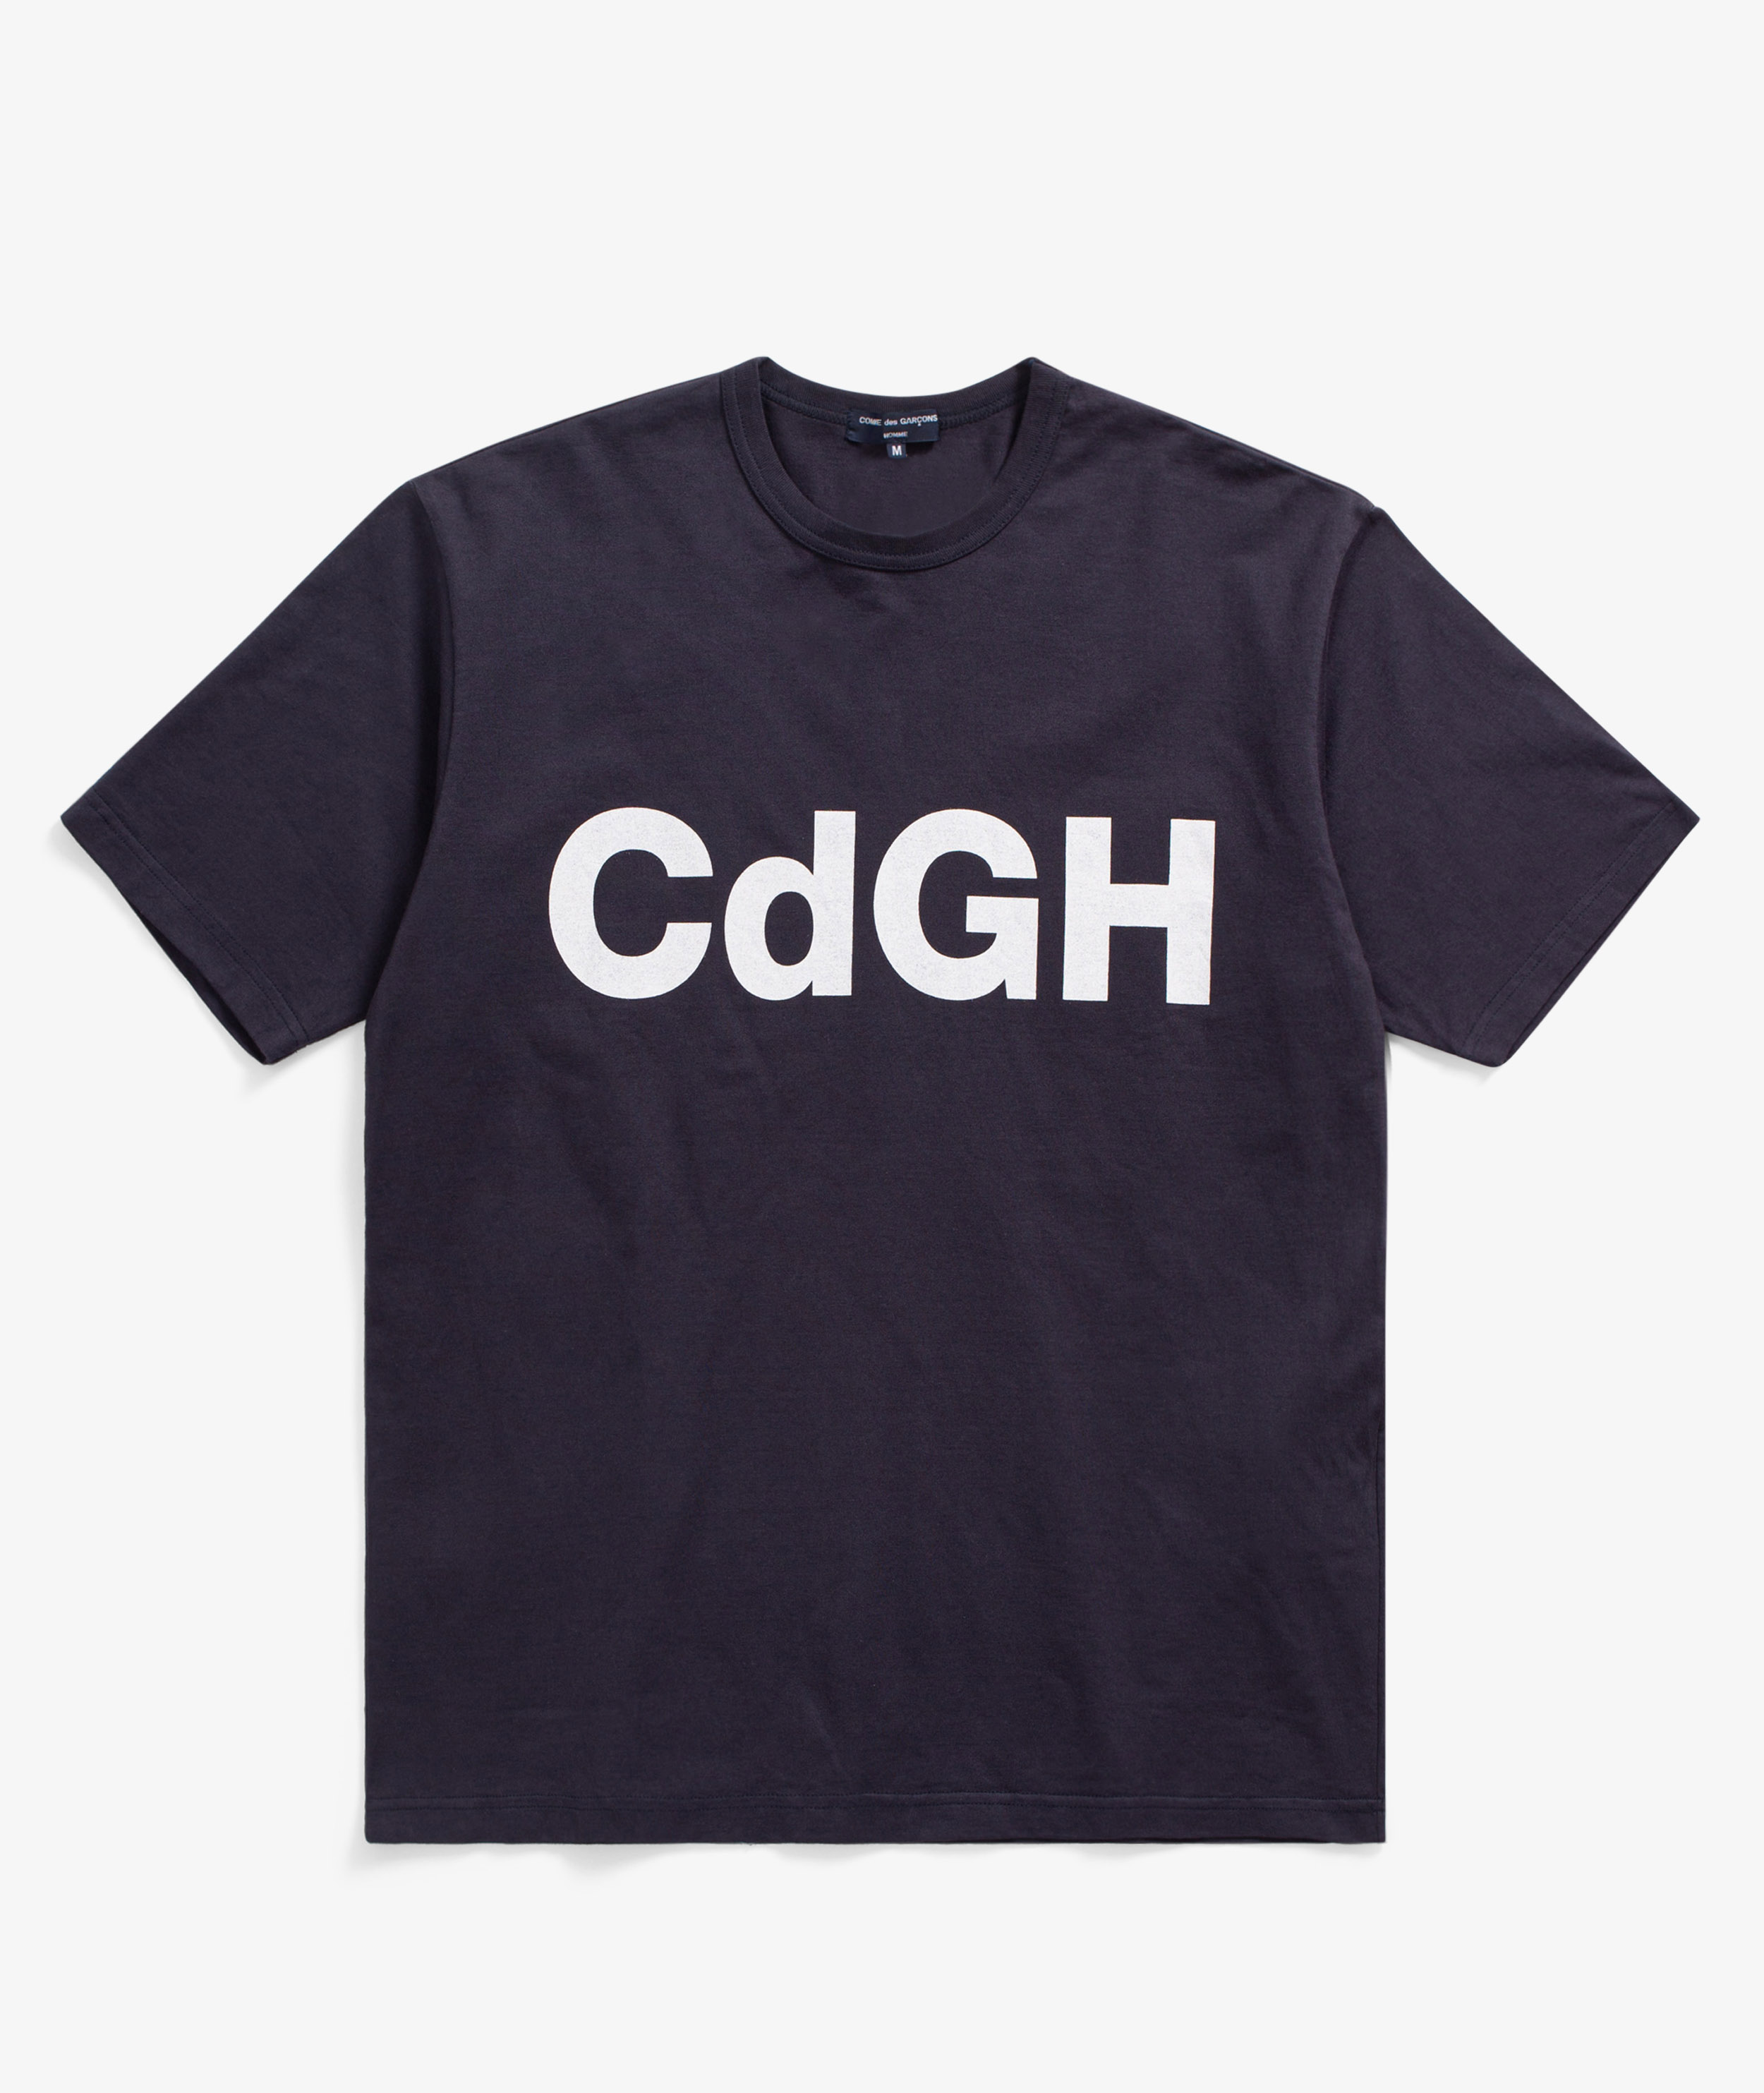 Norse Store | Shipping Worldwide - Comme des Garcons Homme CdGH